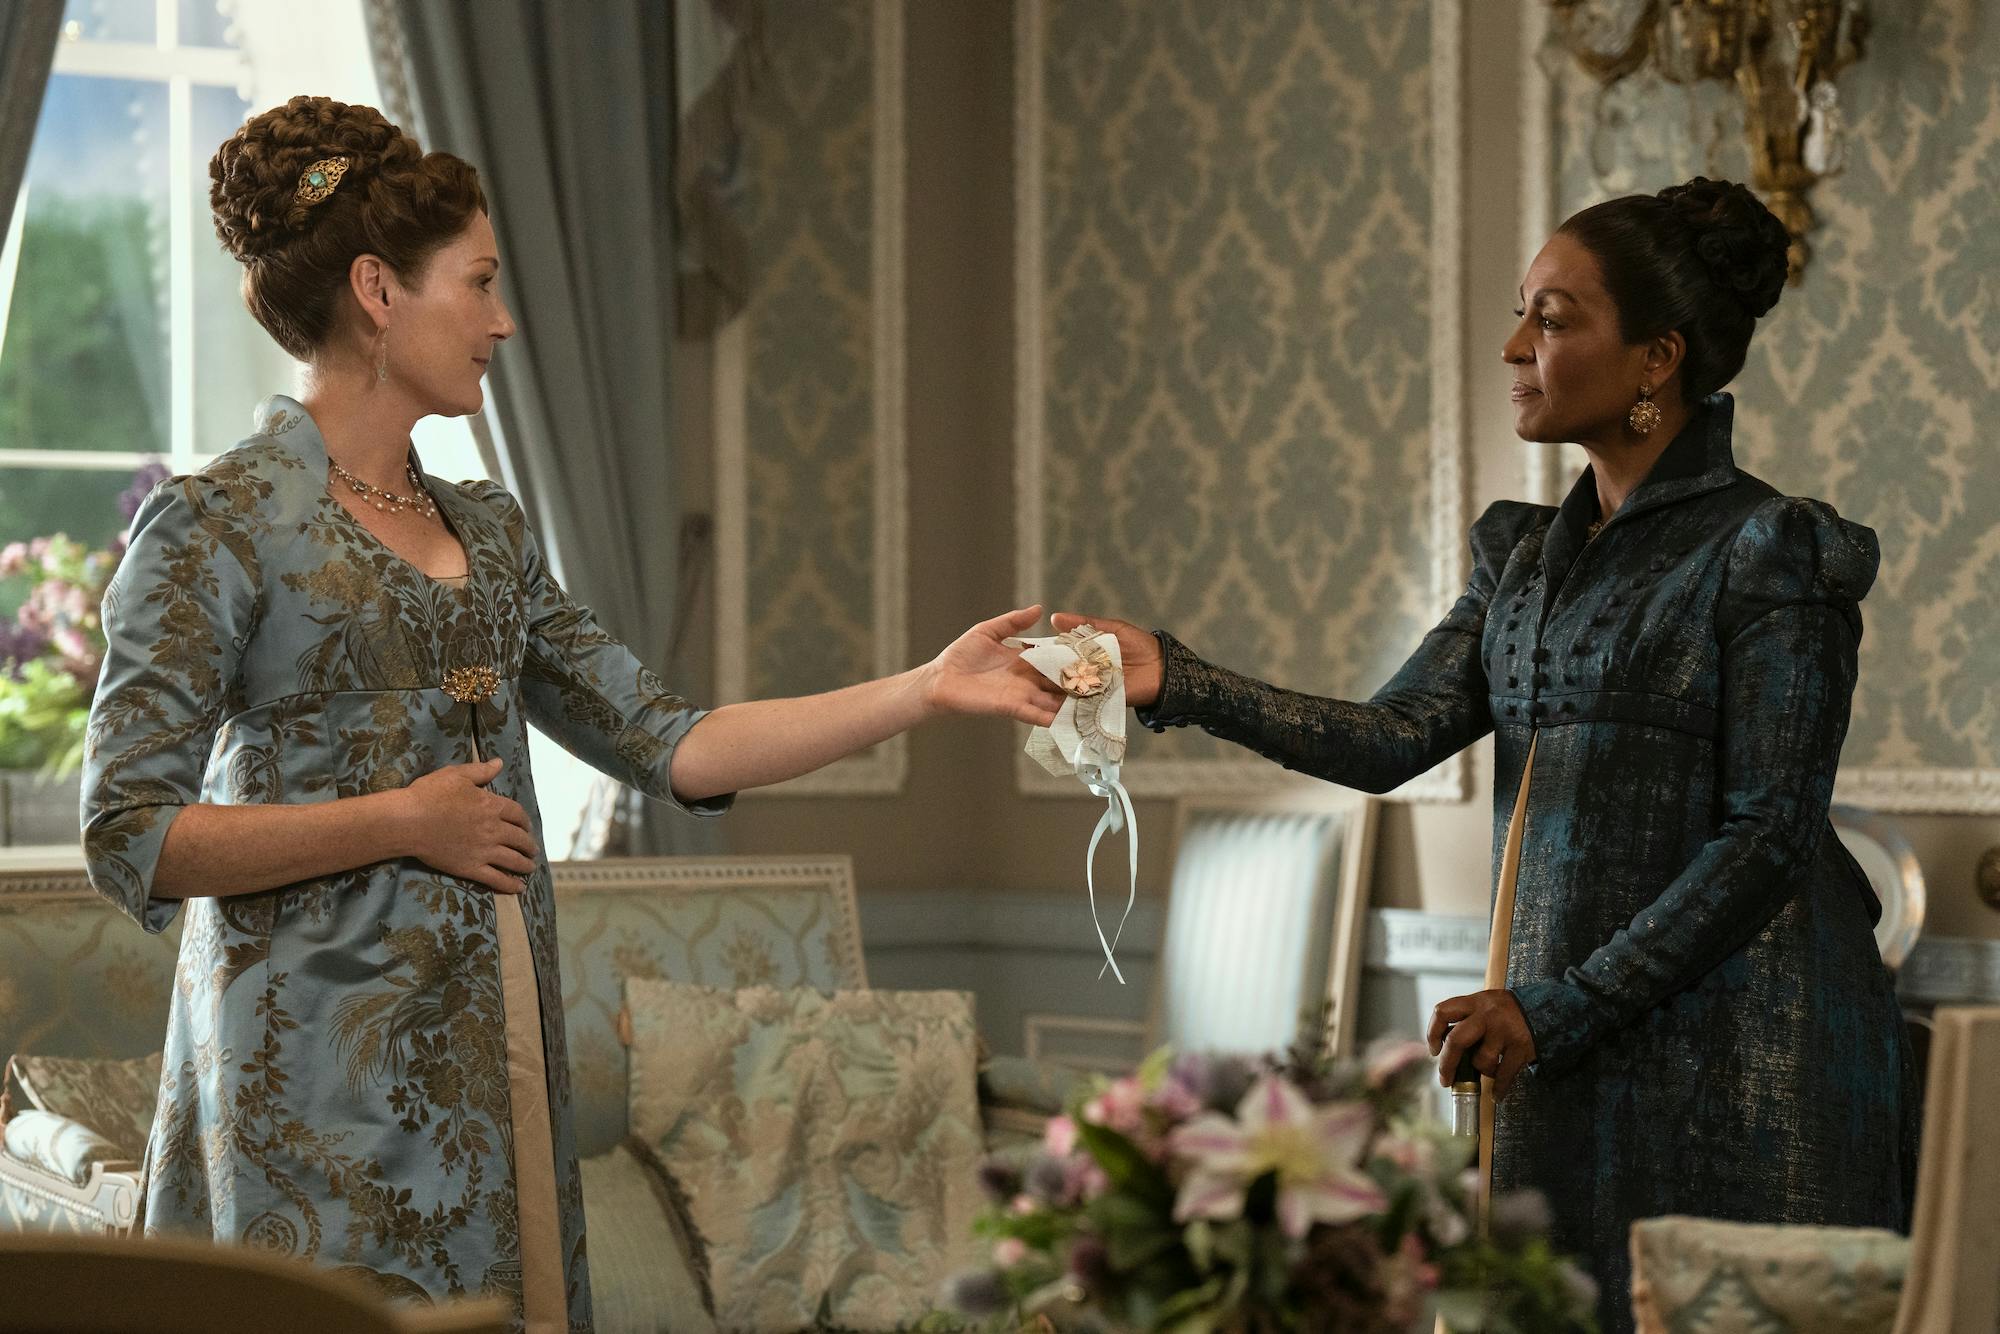 ruth gemmell (left) and adjoa andoh (right) in queen charlotte